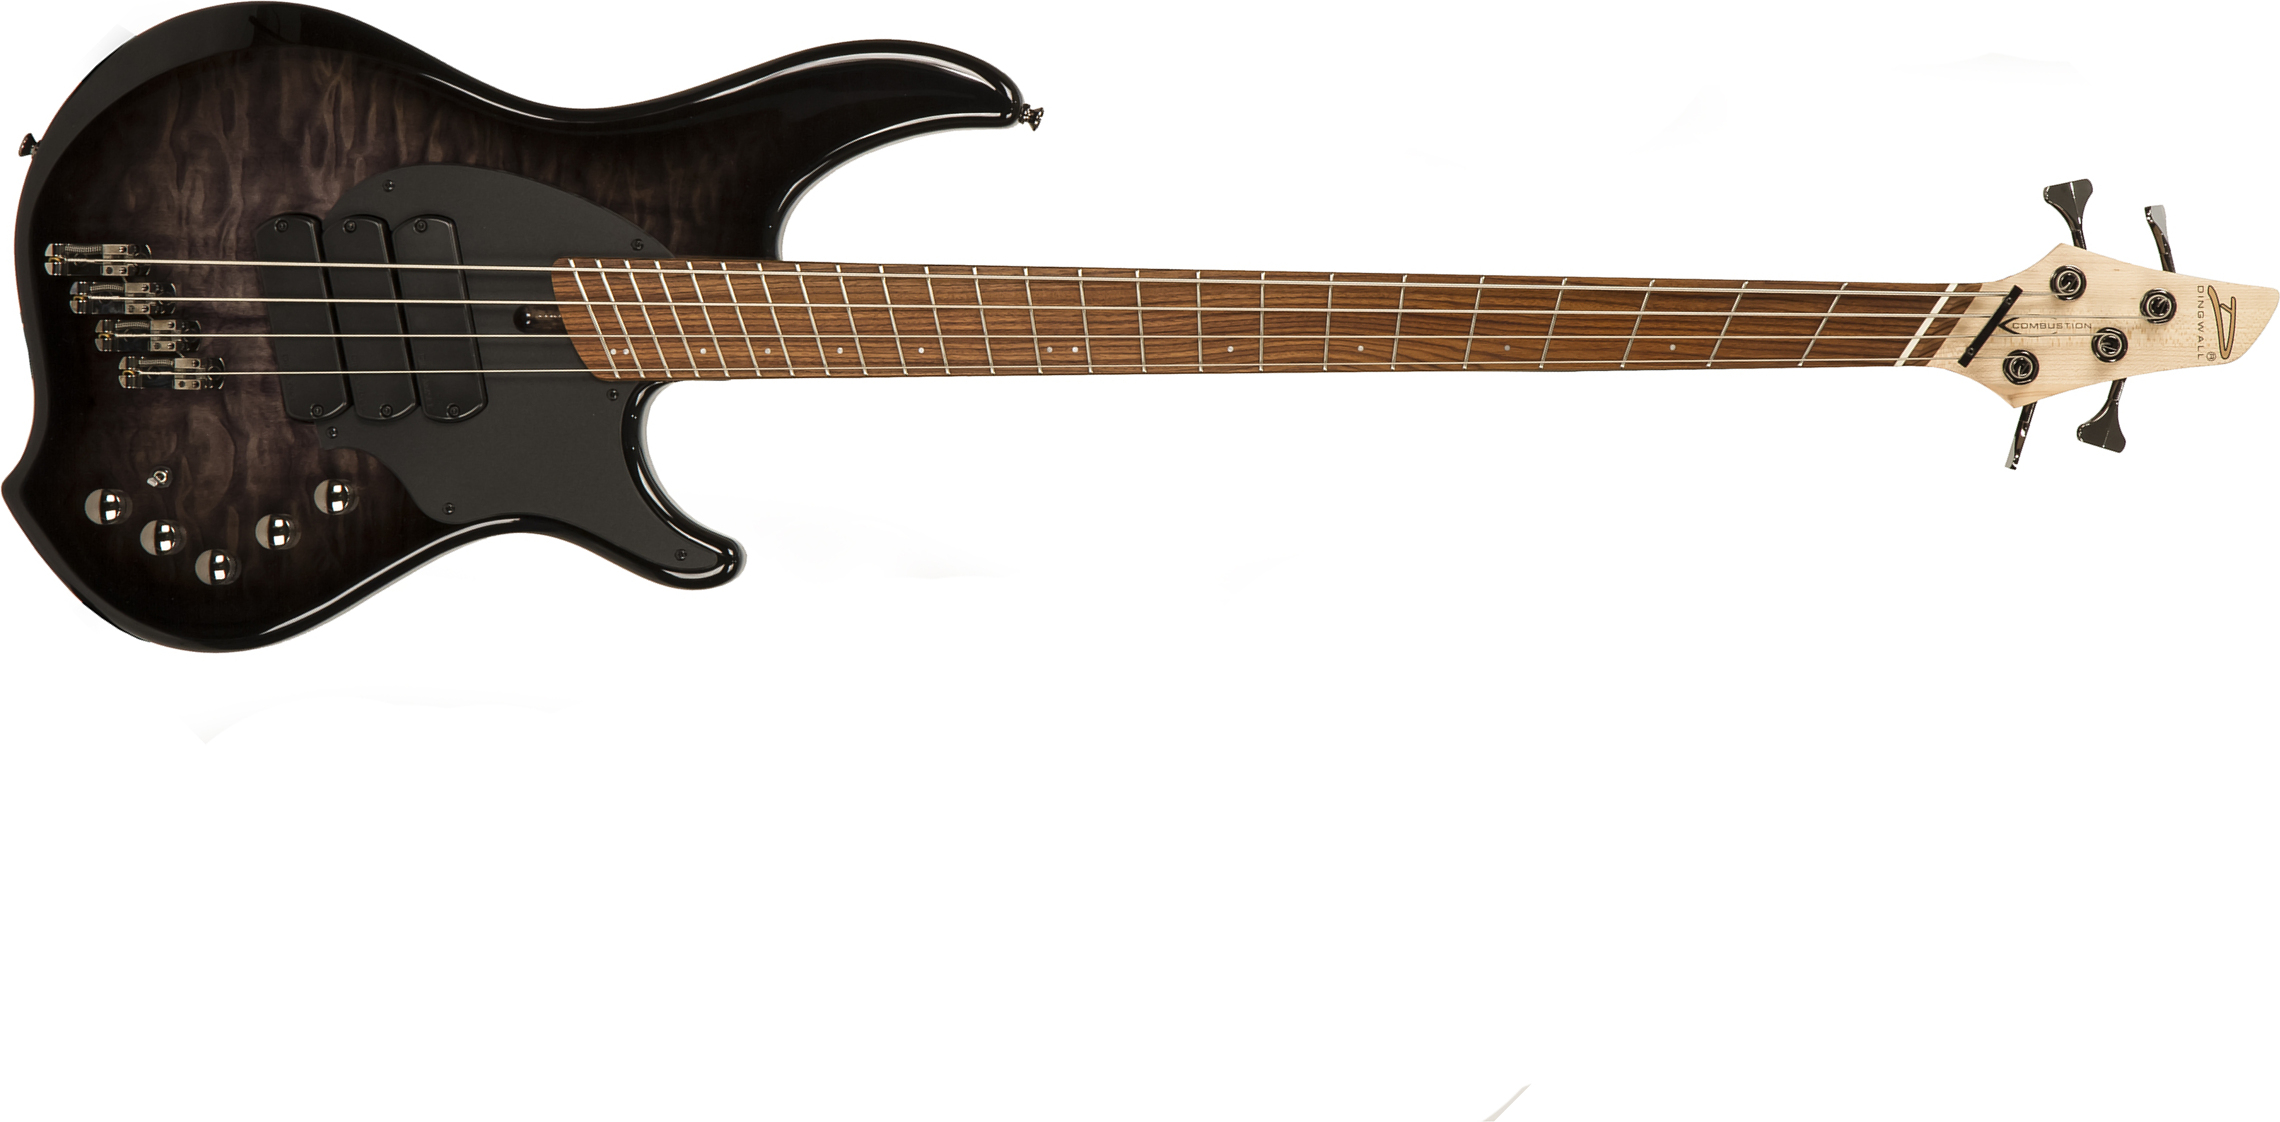 Dingwall Combustion Cb3 4c 3pu Active Mn - Black Burst - Solid body electric bass - Main picture